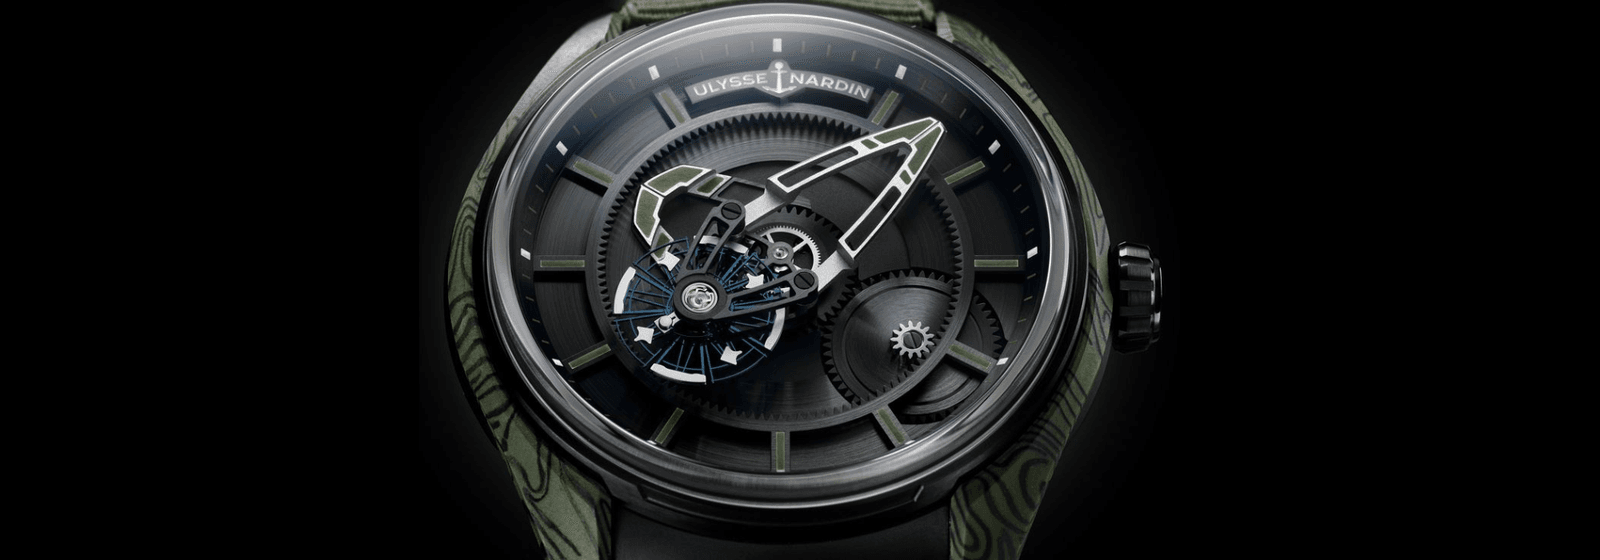 Ulysse Nardin Launches New "Stealth Mode" Freak [X OPS]